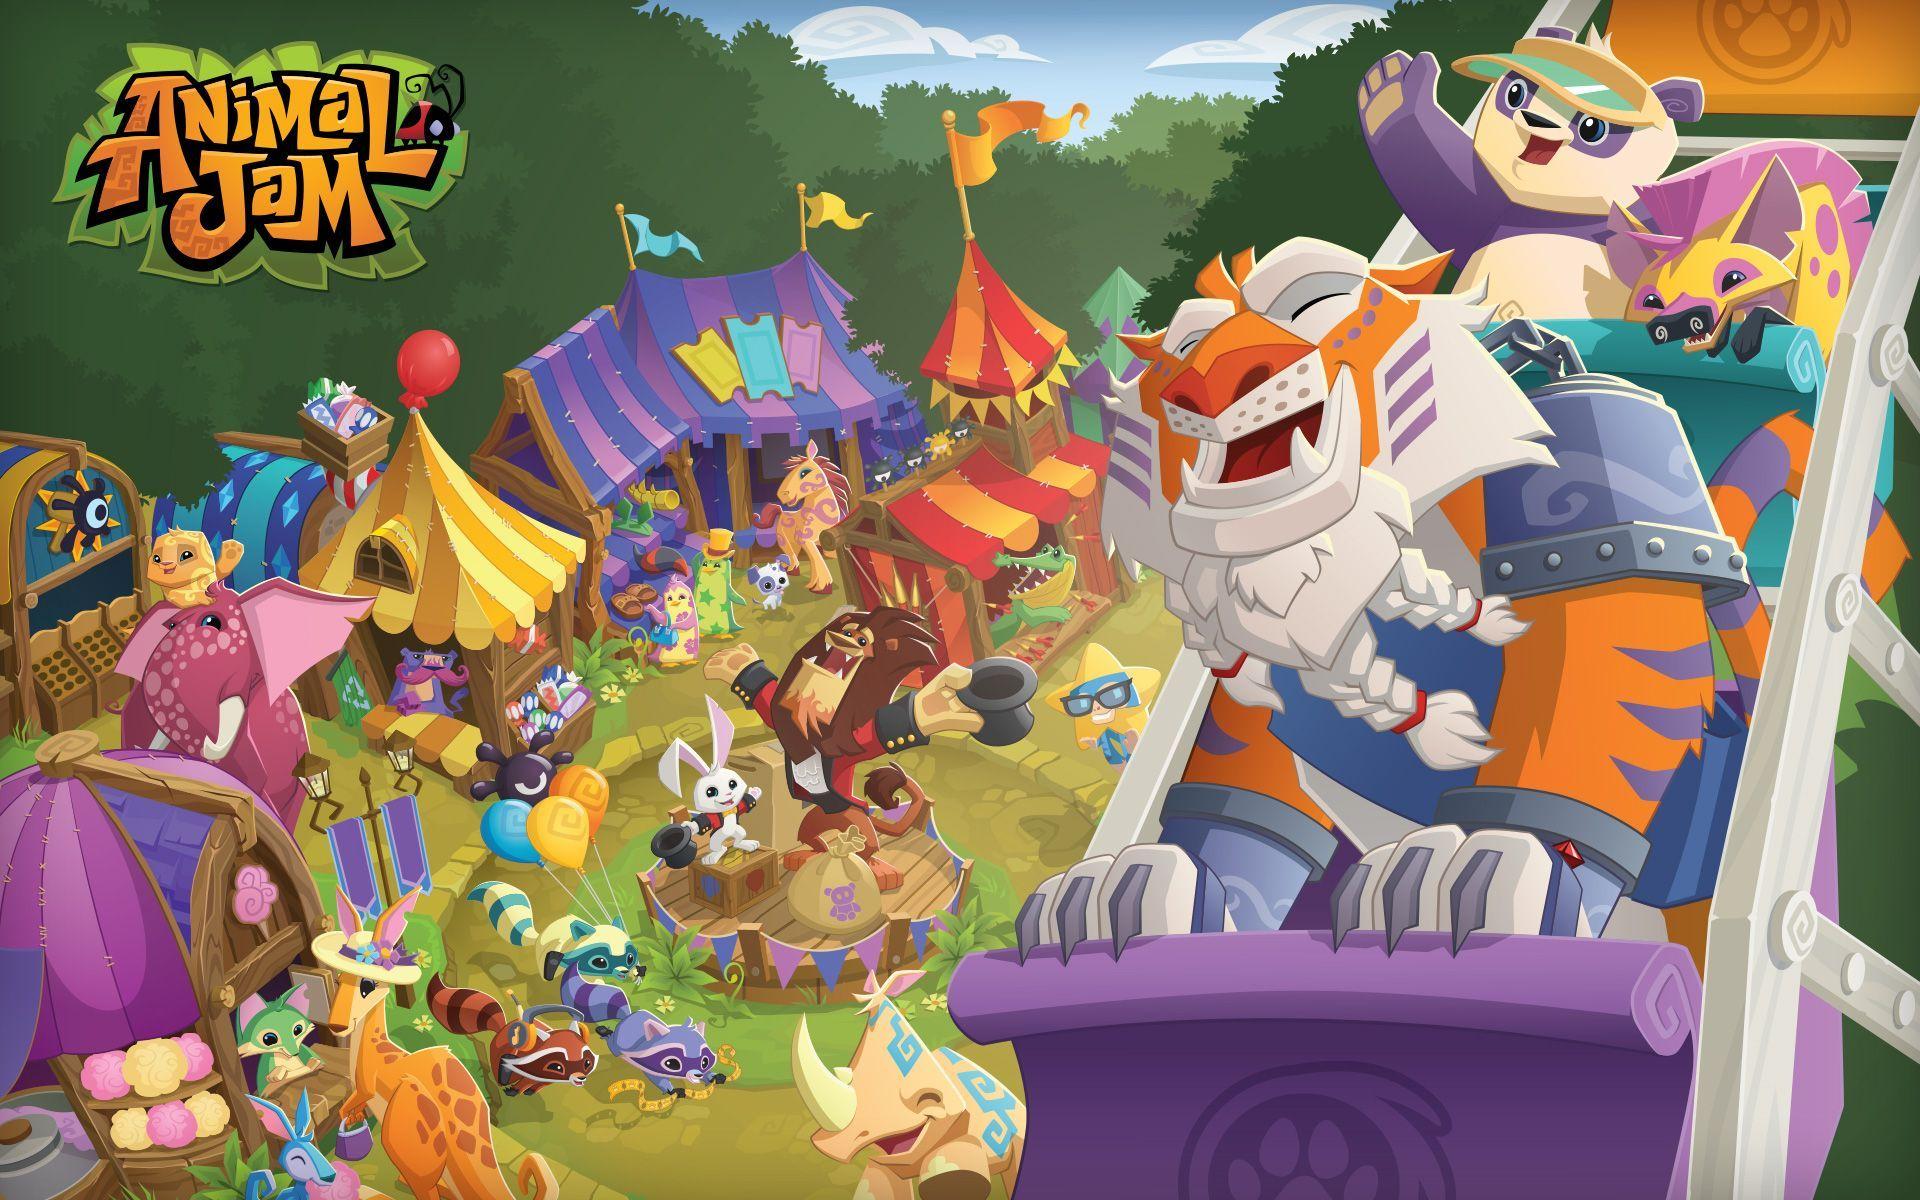 ANIMAL JAM. These neat wallpaper can be used for Bloger banners